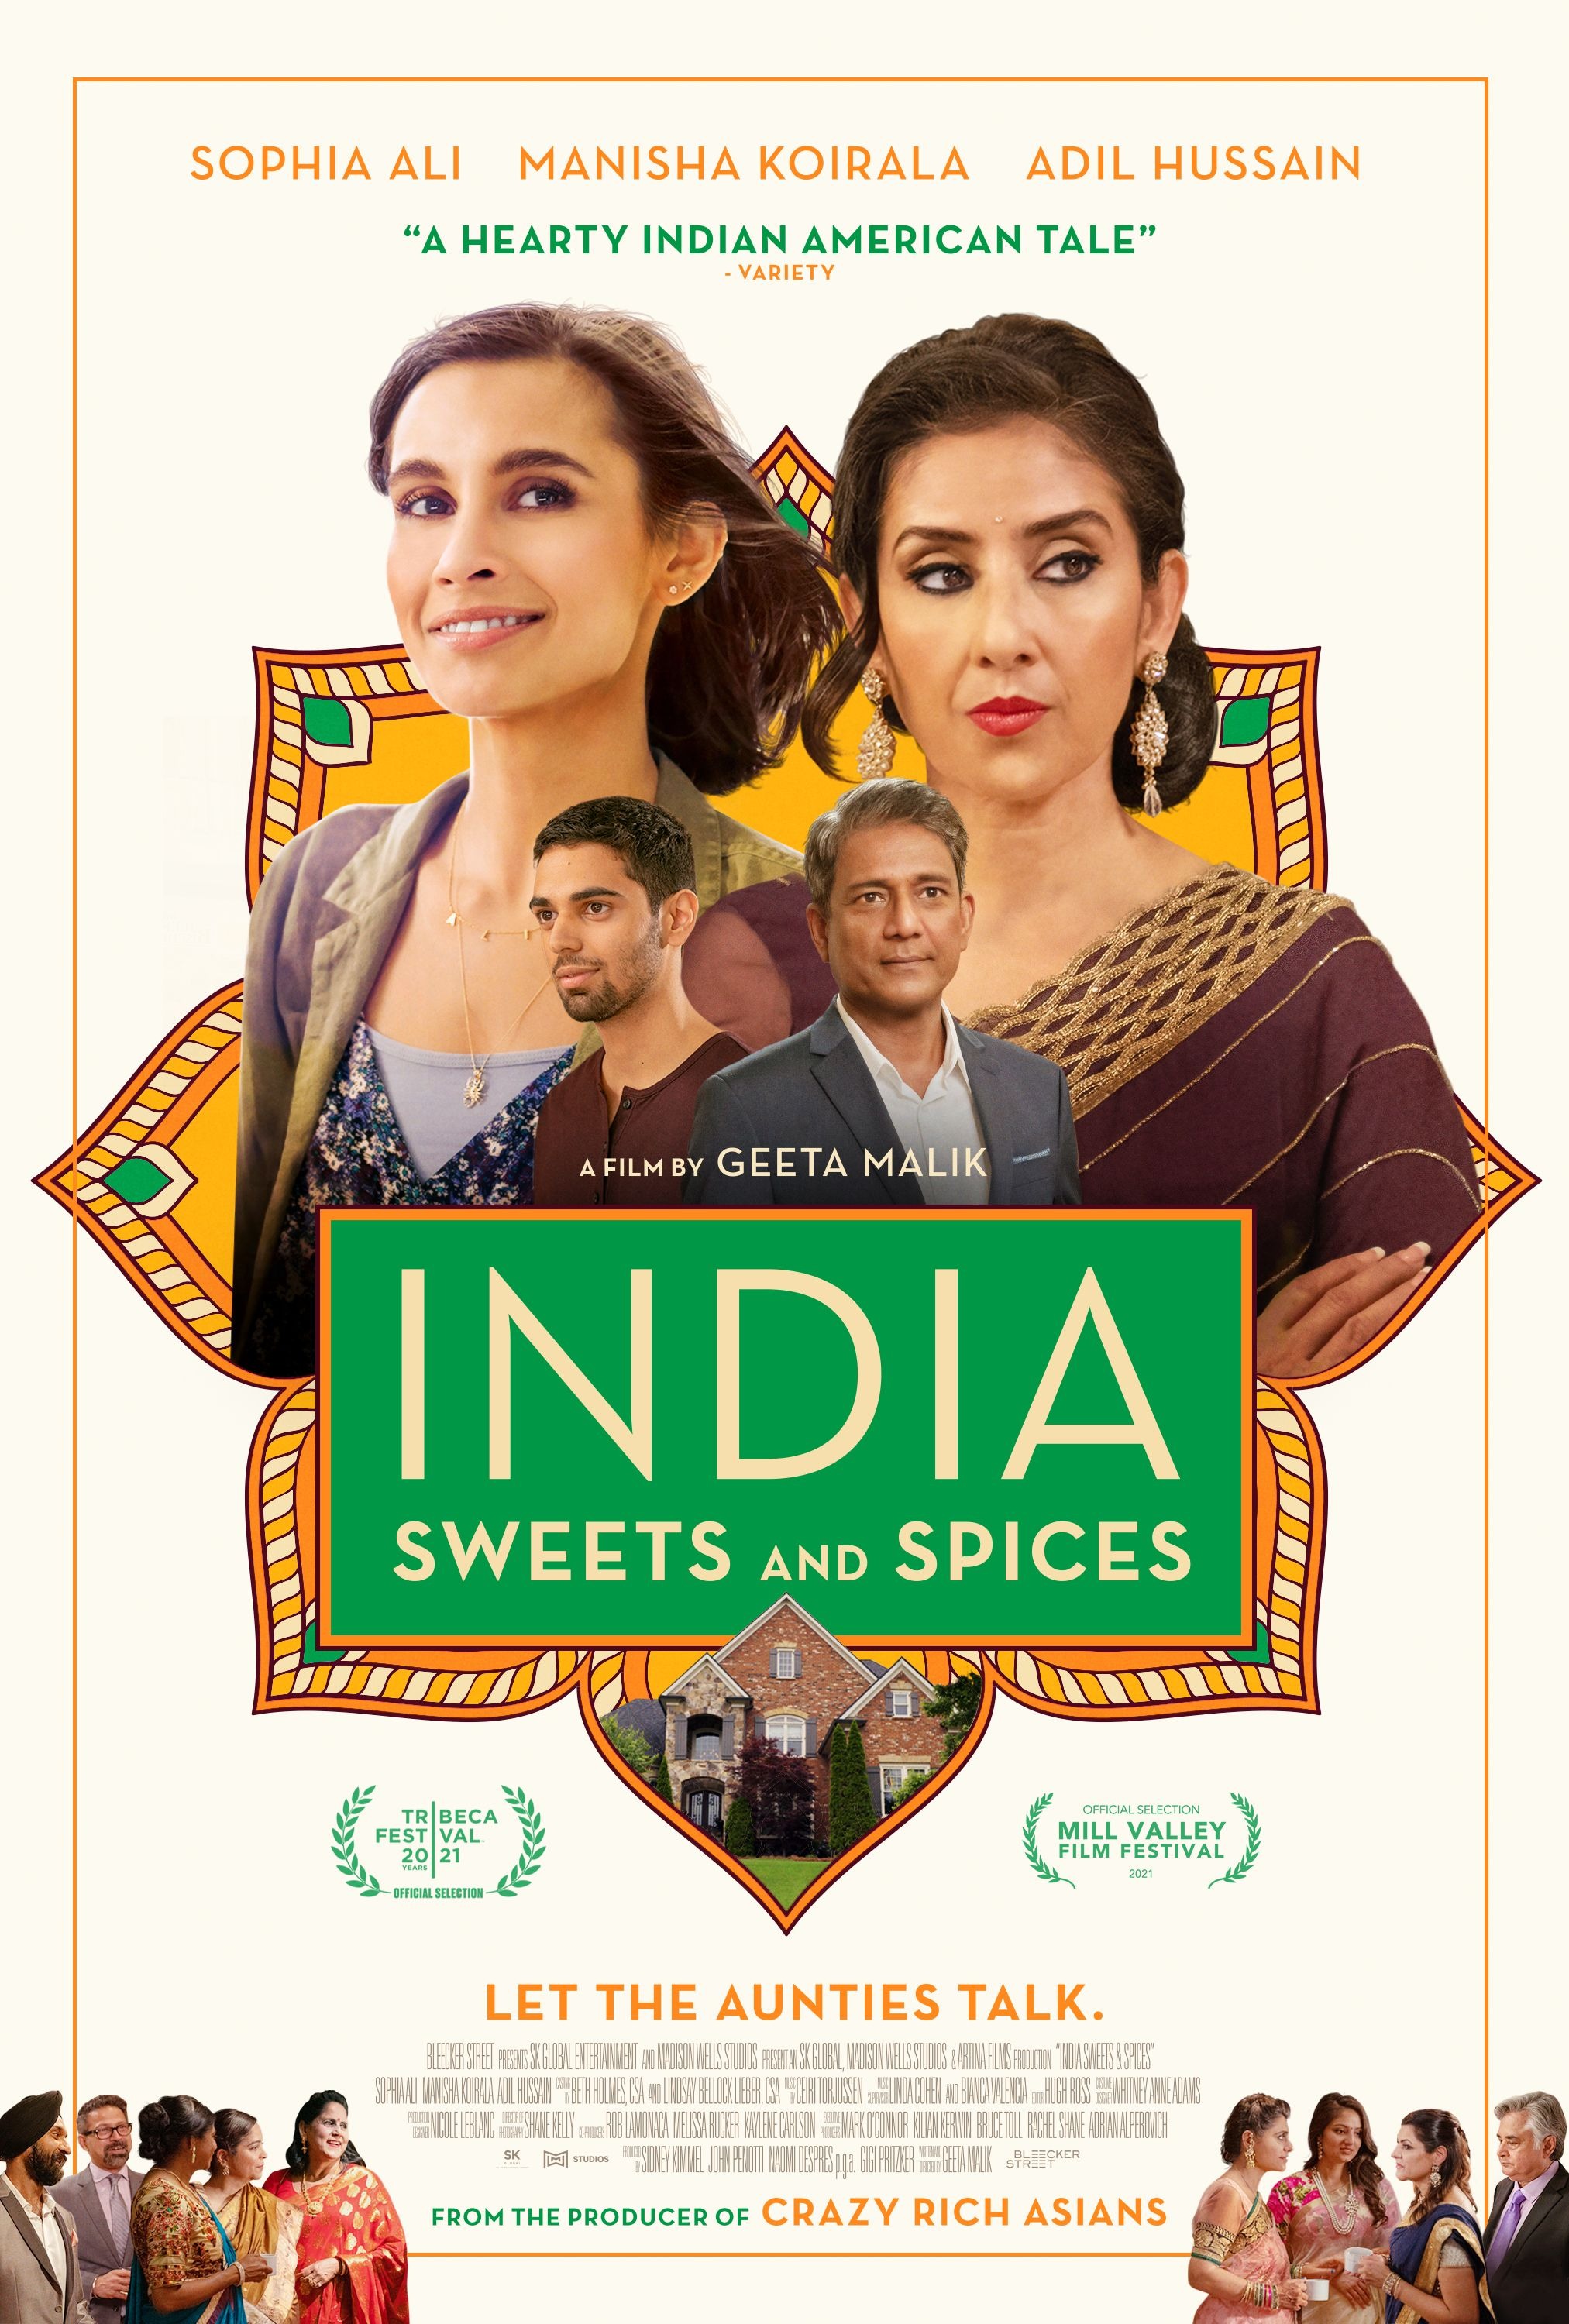 Mega Sized Movie Poster Image for India Sweets and Spices 